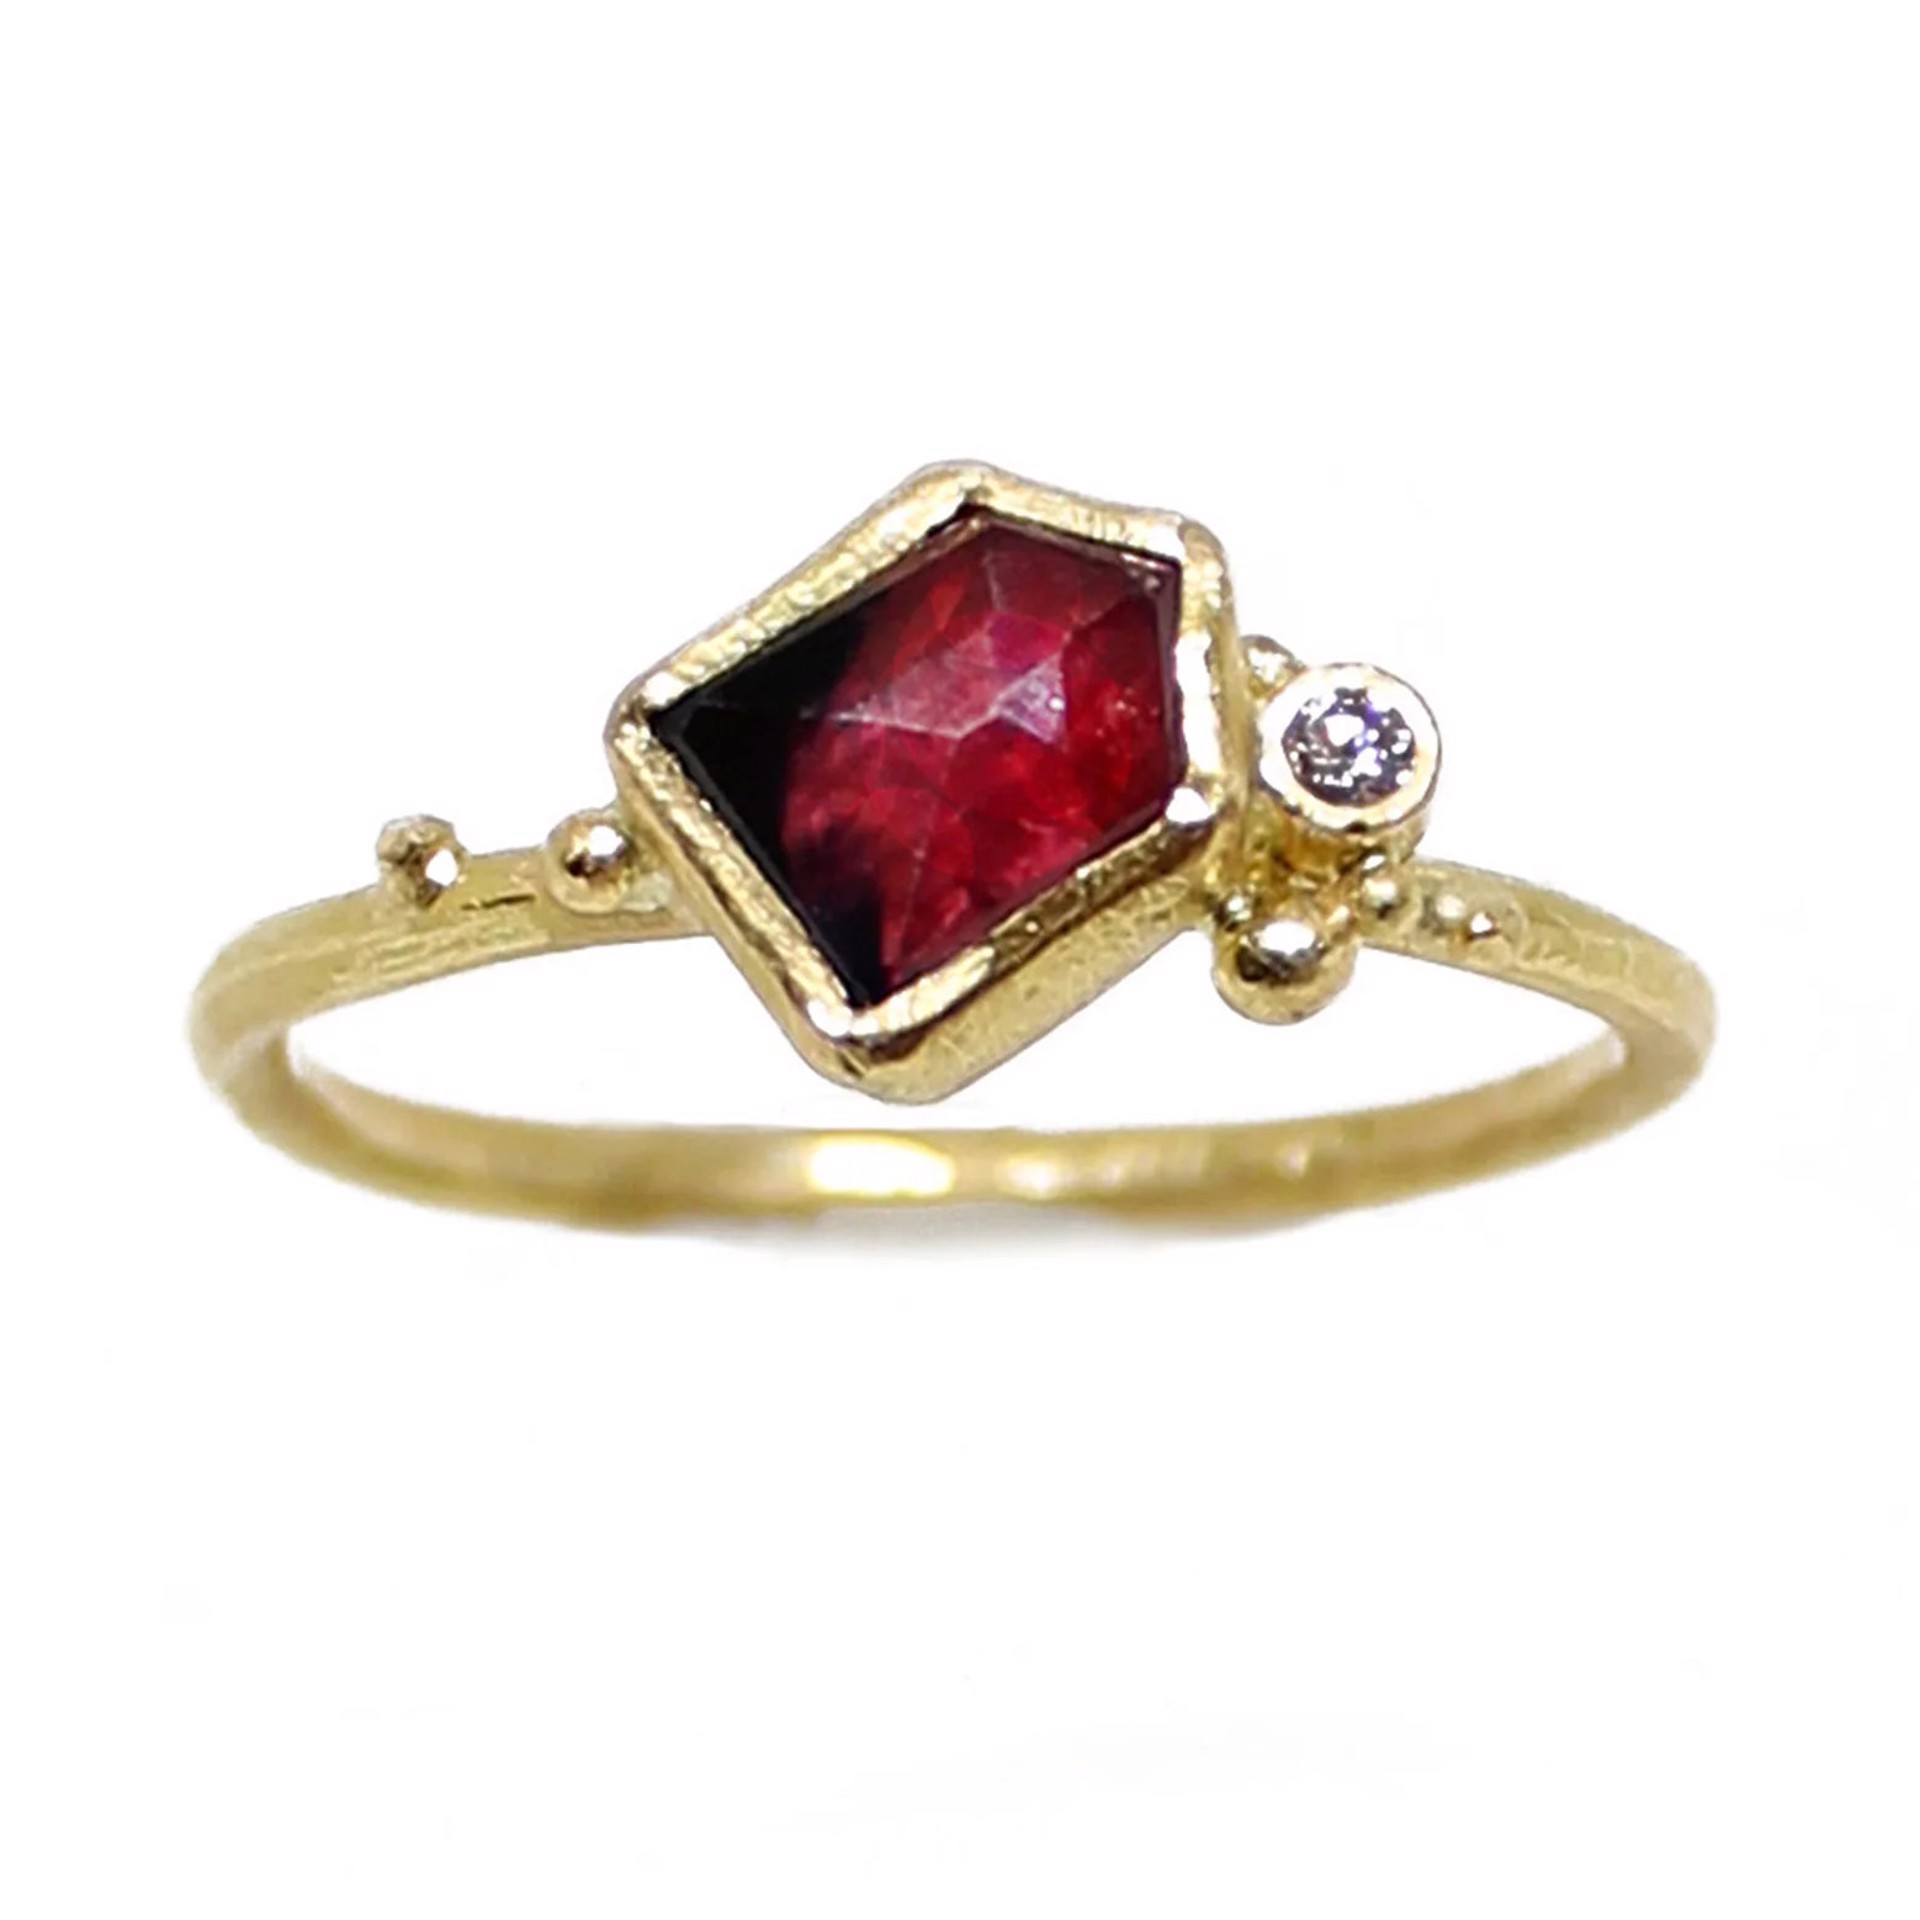 Pink & Blue Sapphire Ring by Leia Zumbro